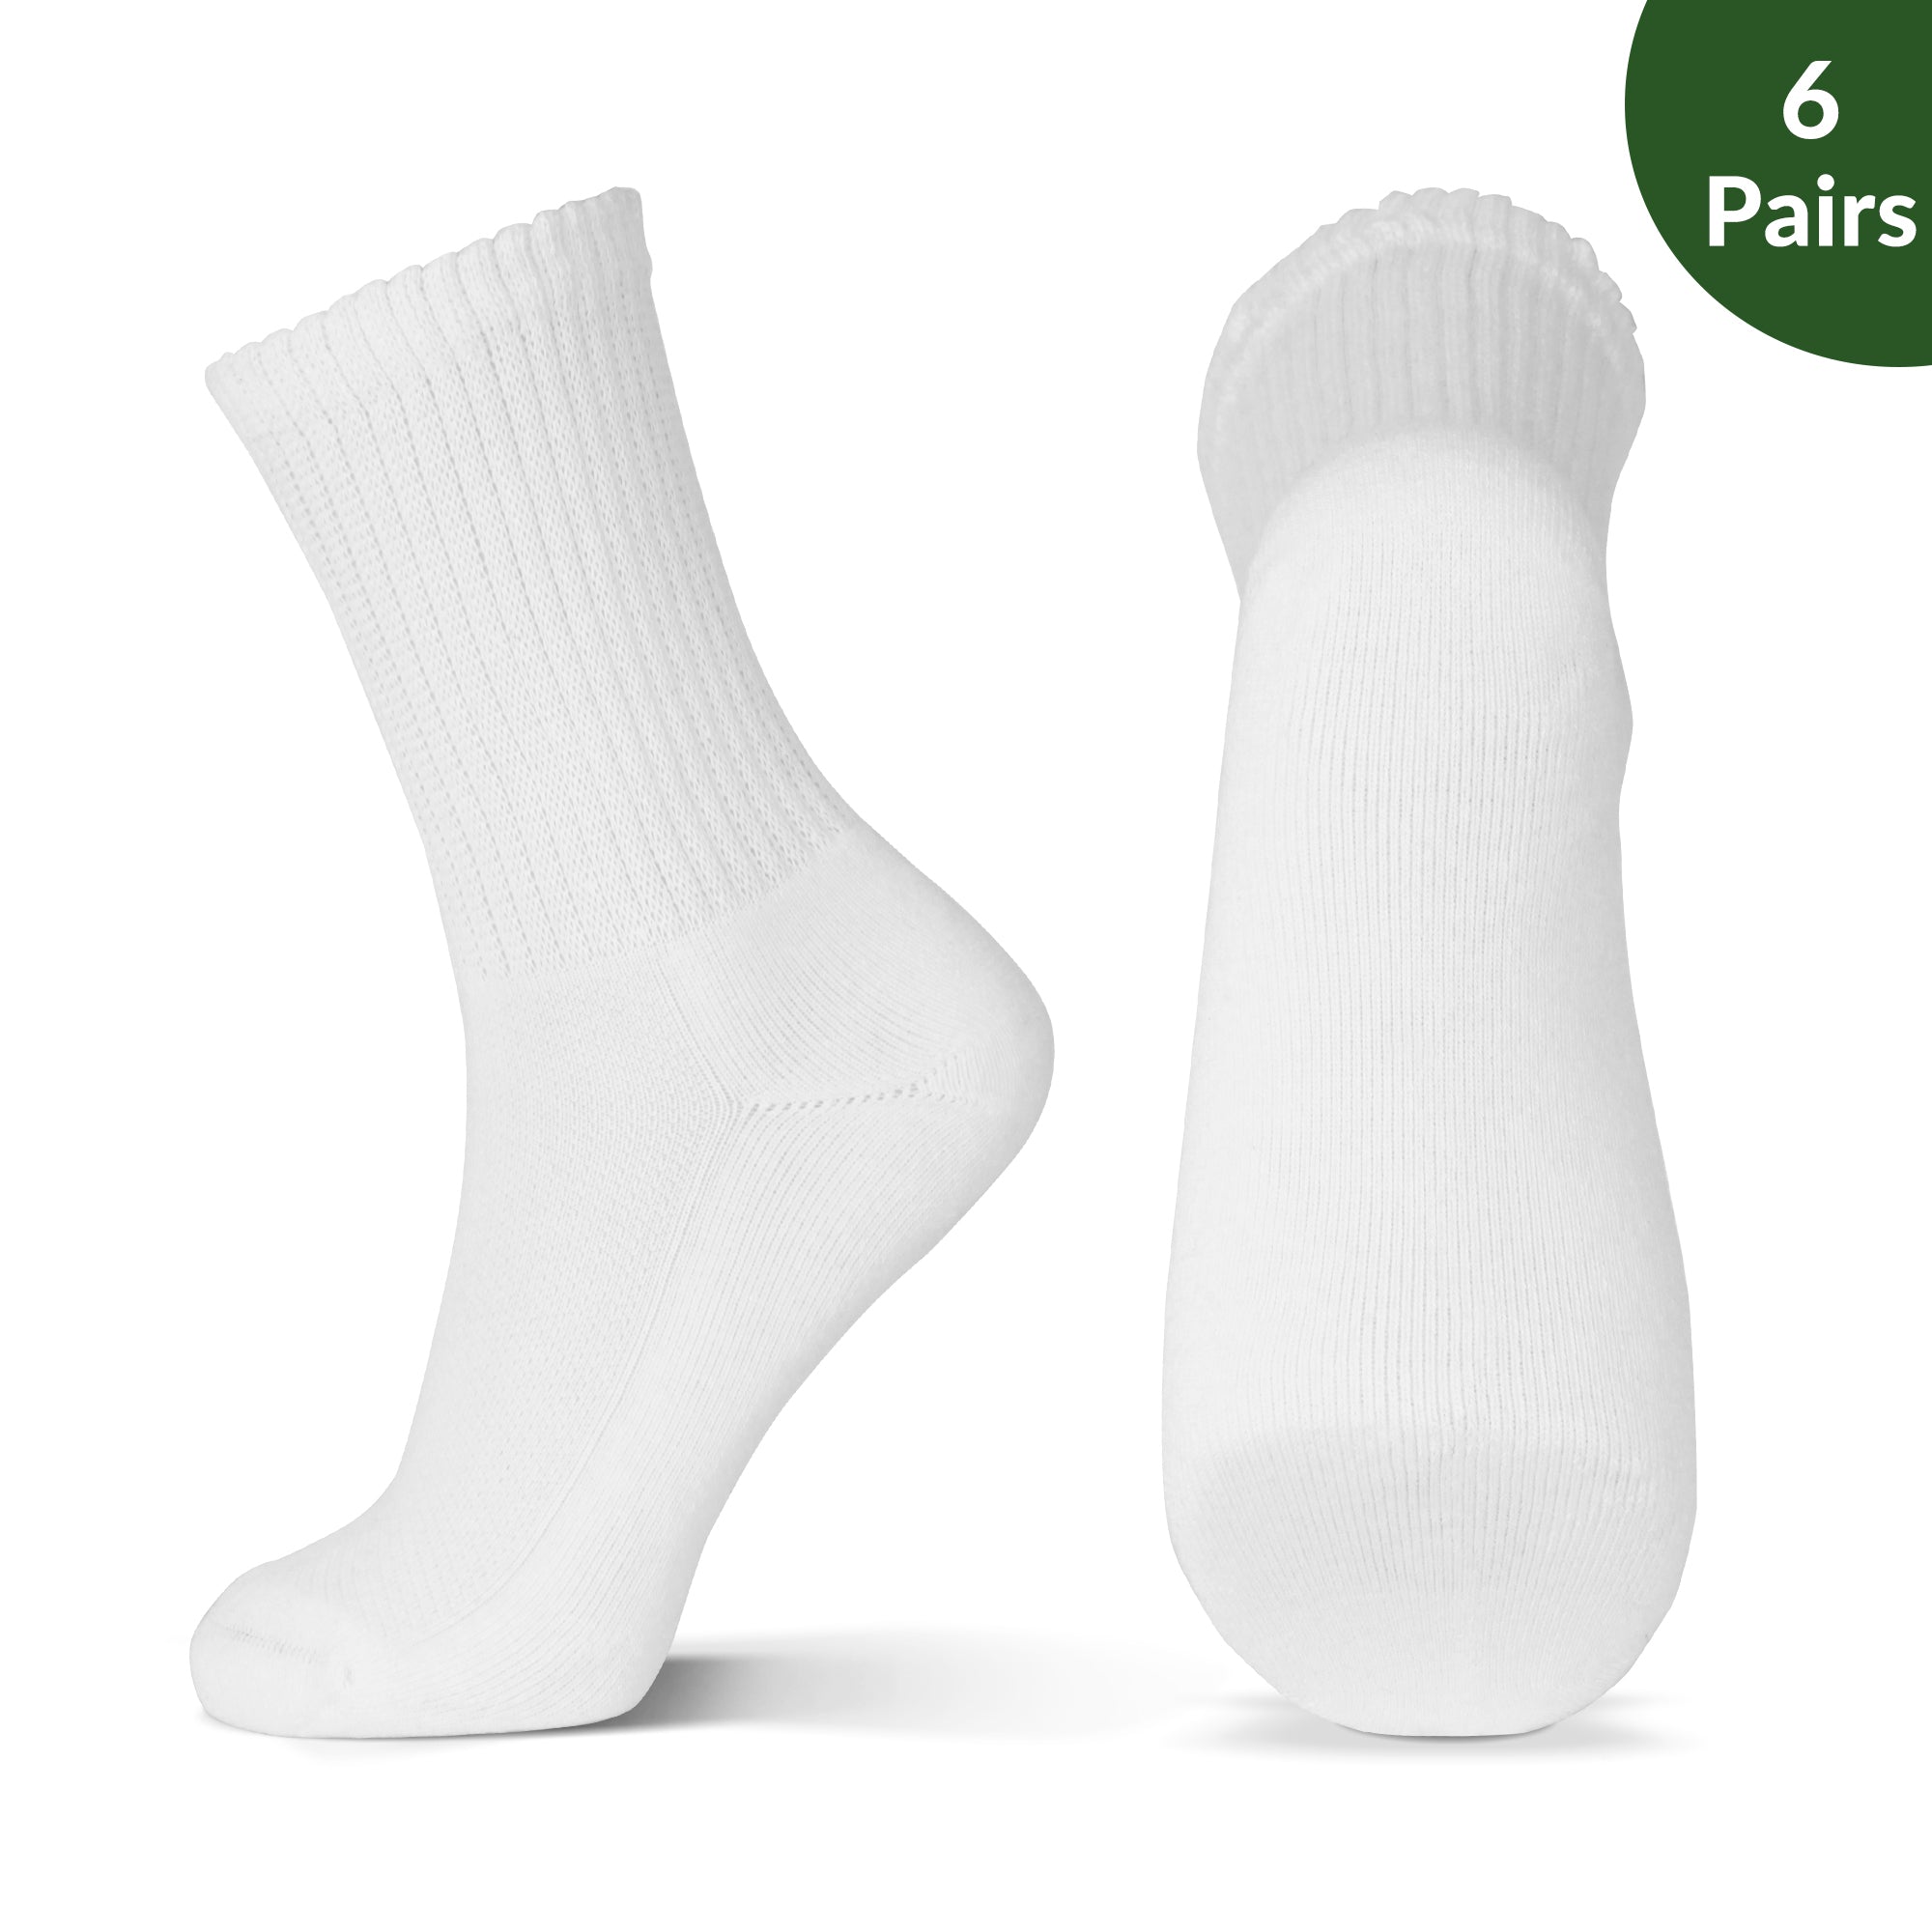 Breathable Cotton Diabetic Socks, with Seamless Toe and Cushion Sole 6 Pack